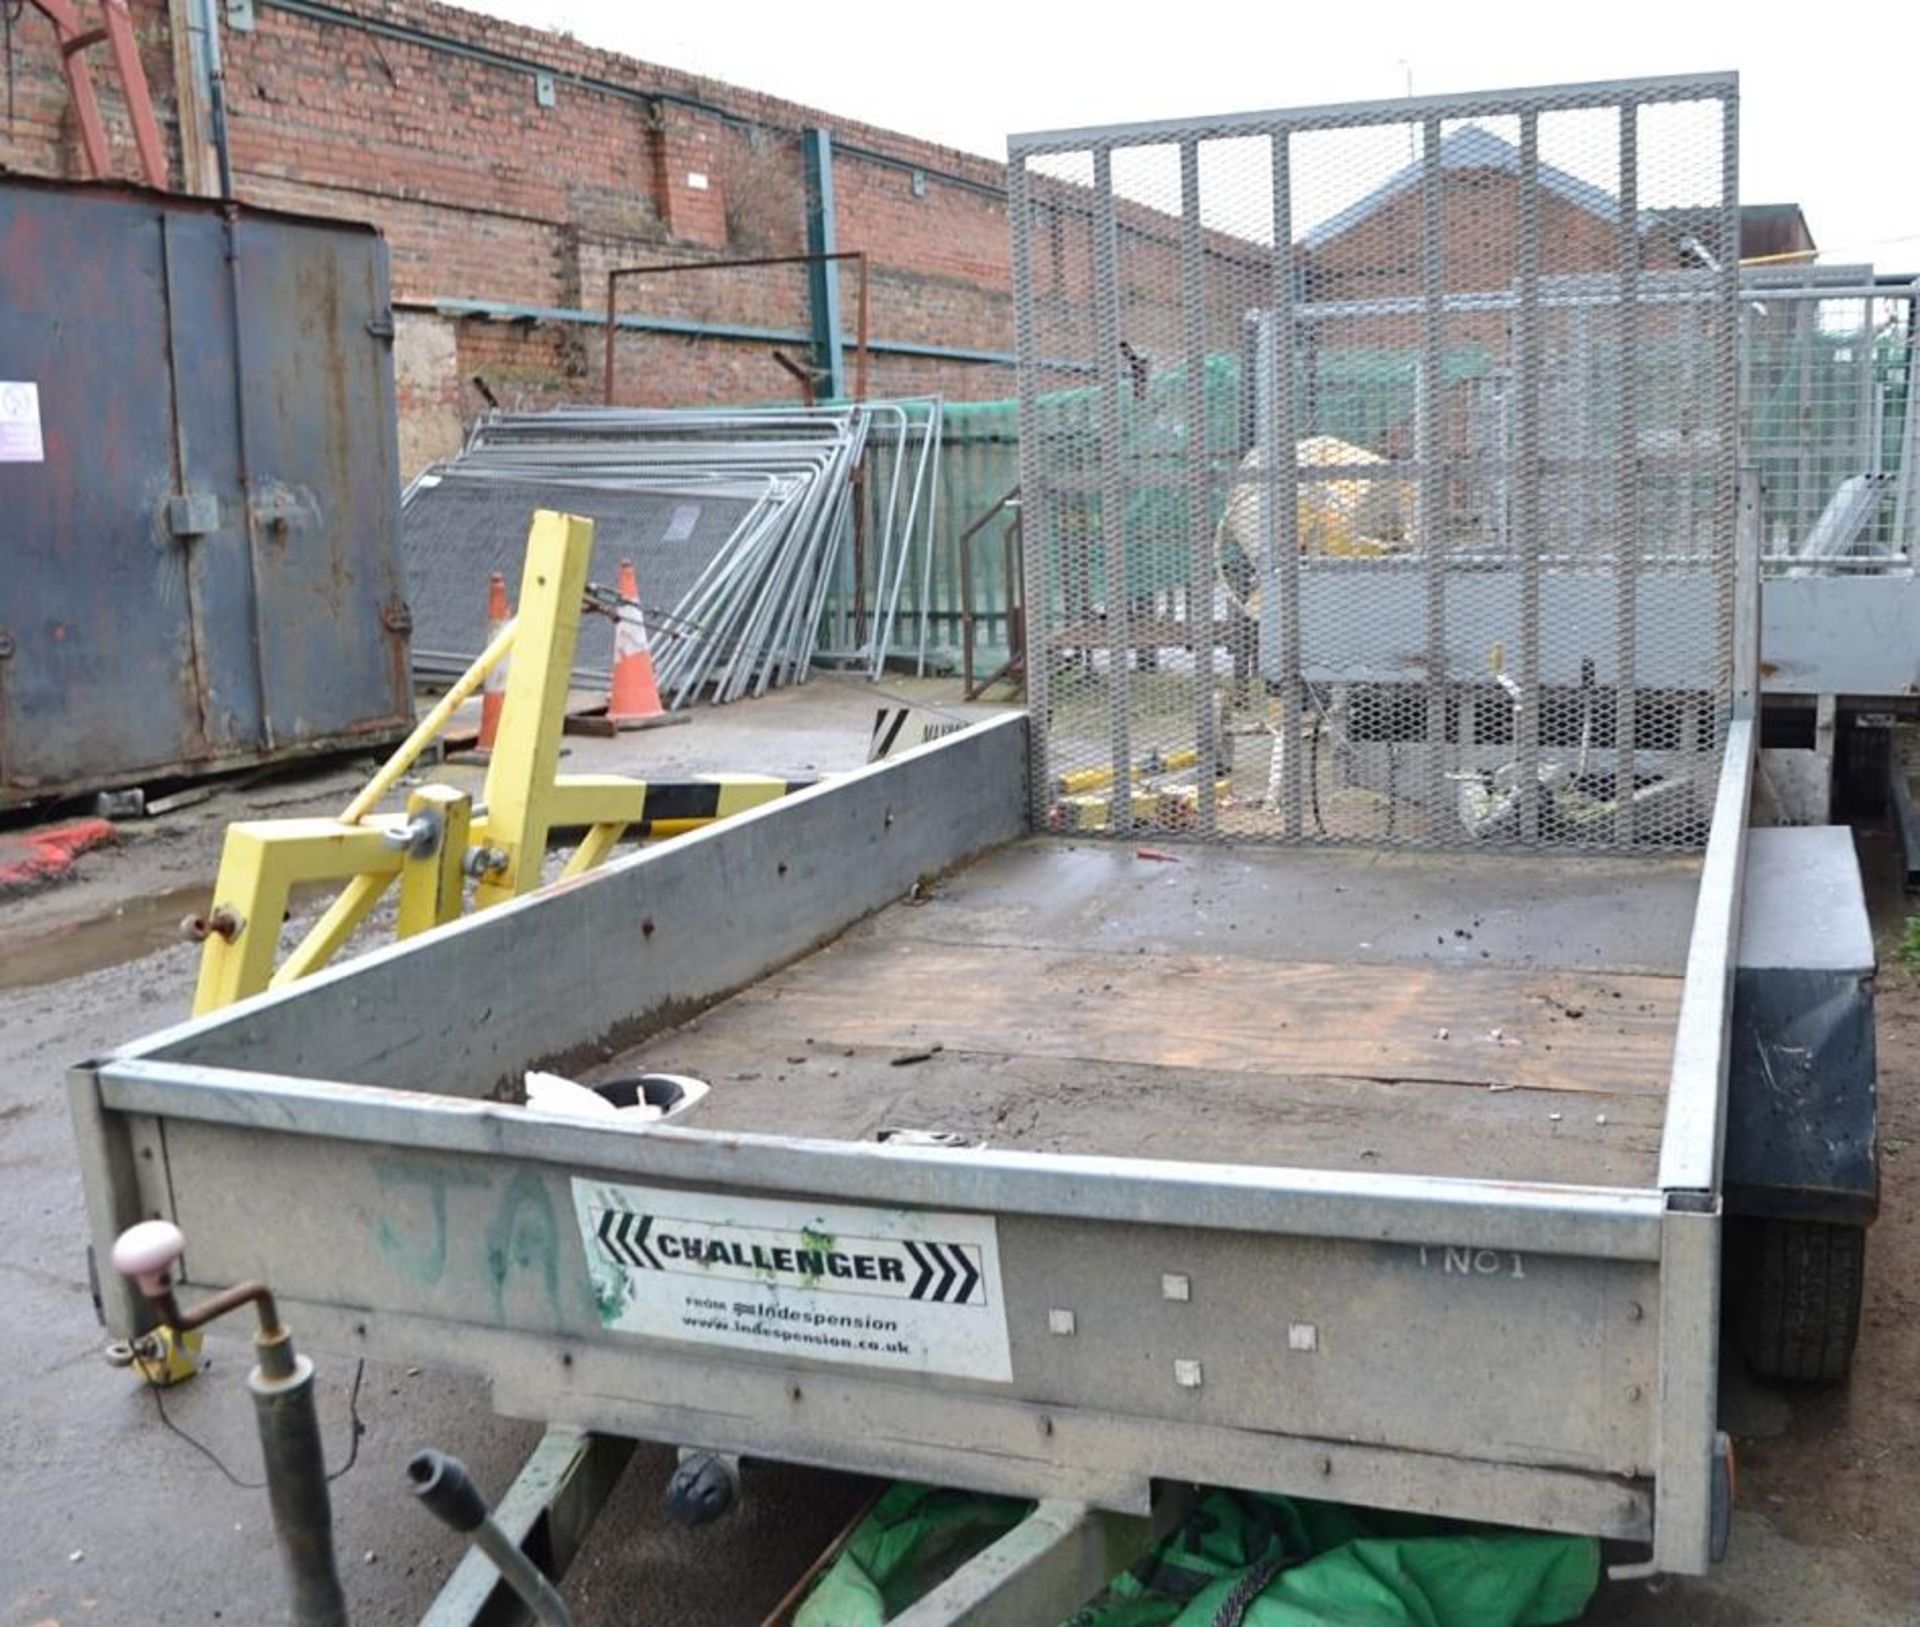 1 x Challenger Indespension 10ft Trailer With 2300Kg Gross Weight - CL464 - Location:Liverpool L19 - Image 10 of 25